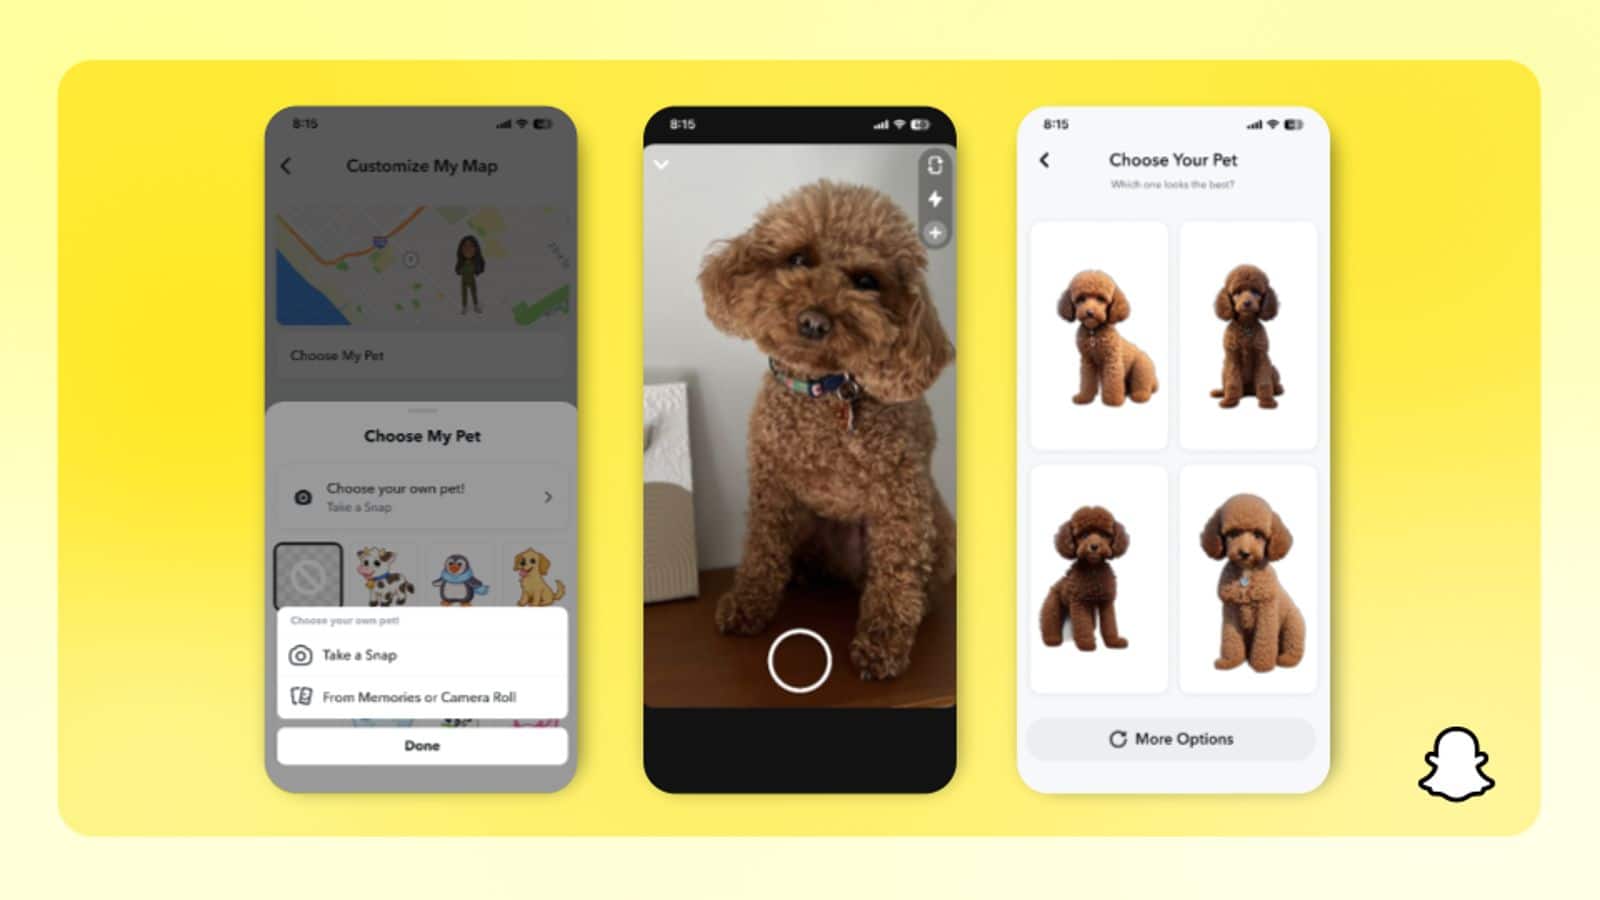 Snapchat's new AI-powered feature makes Bitmoji versions of your pet